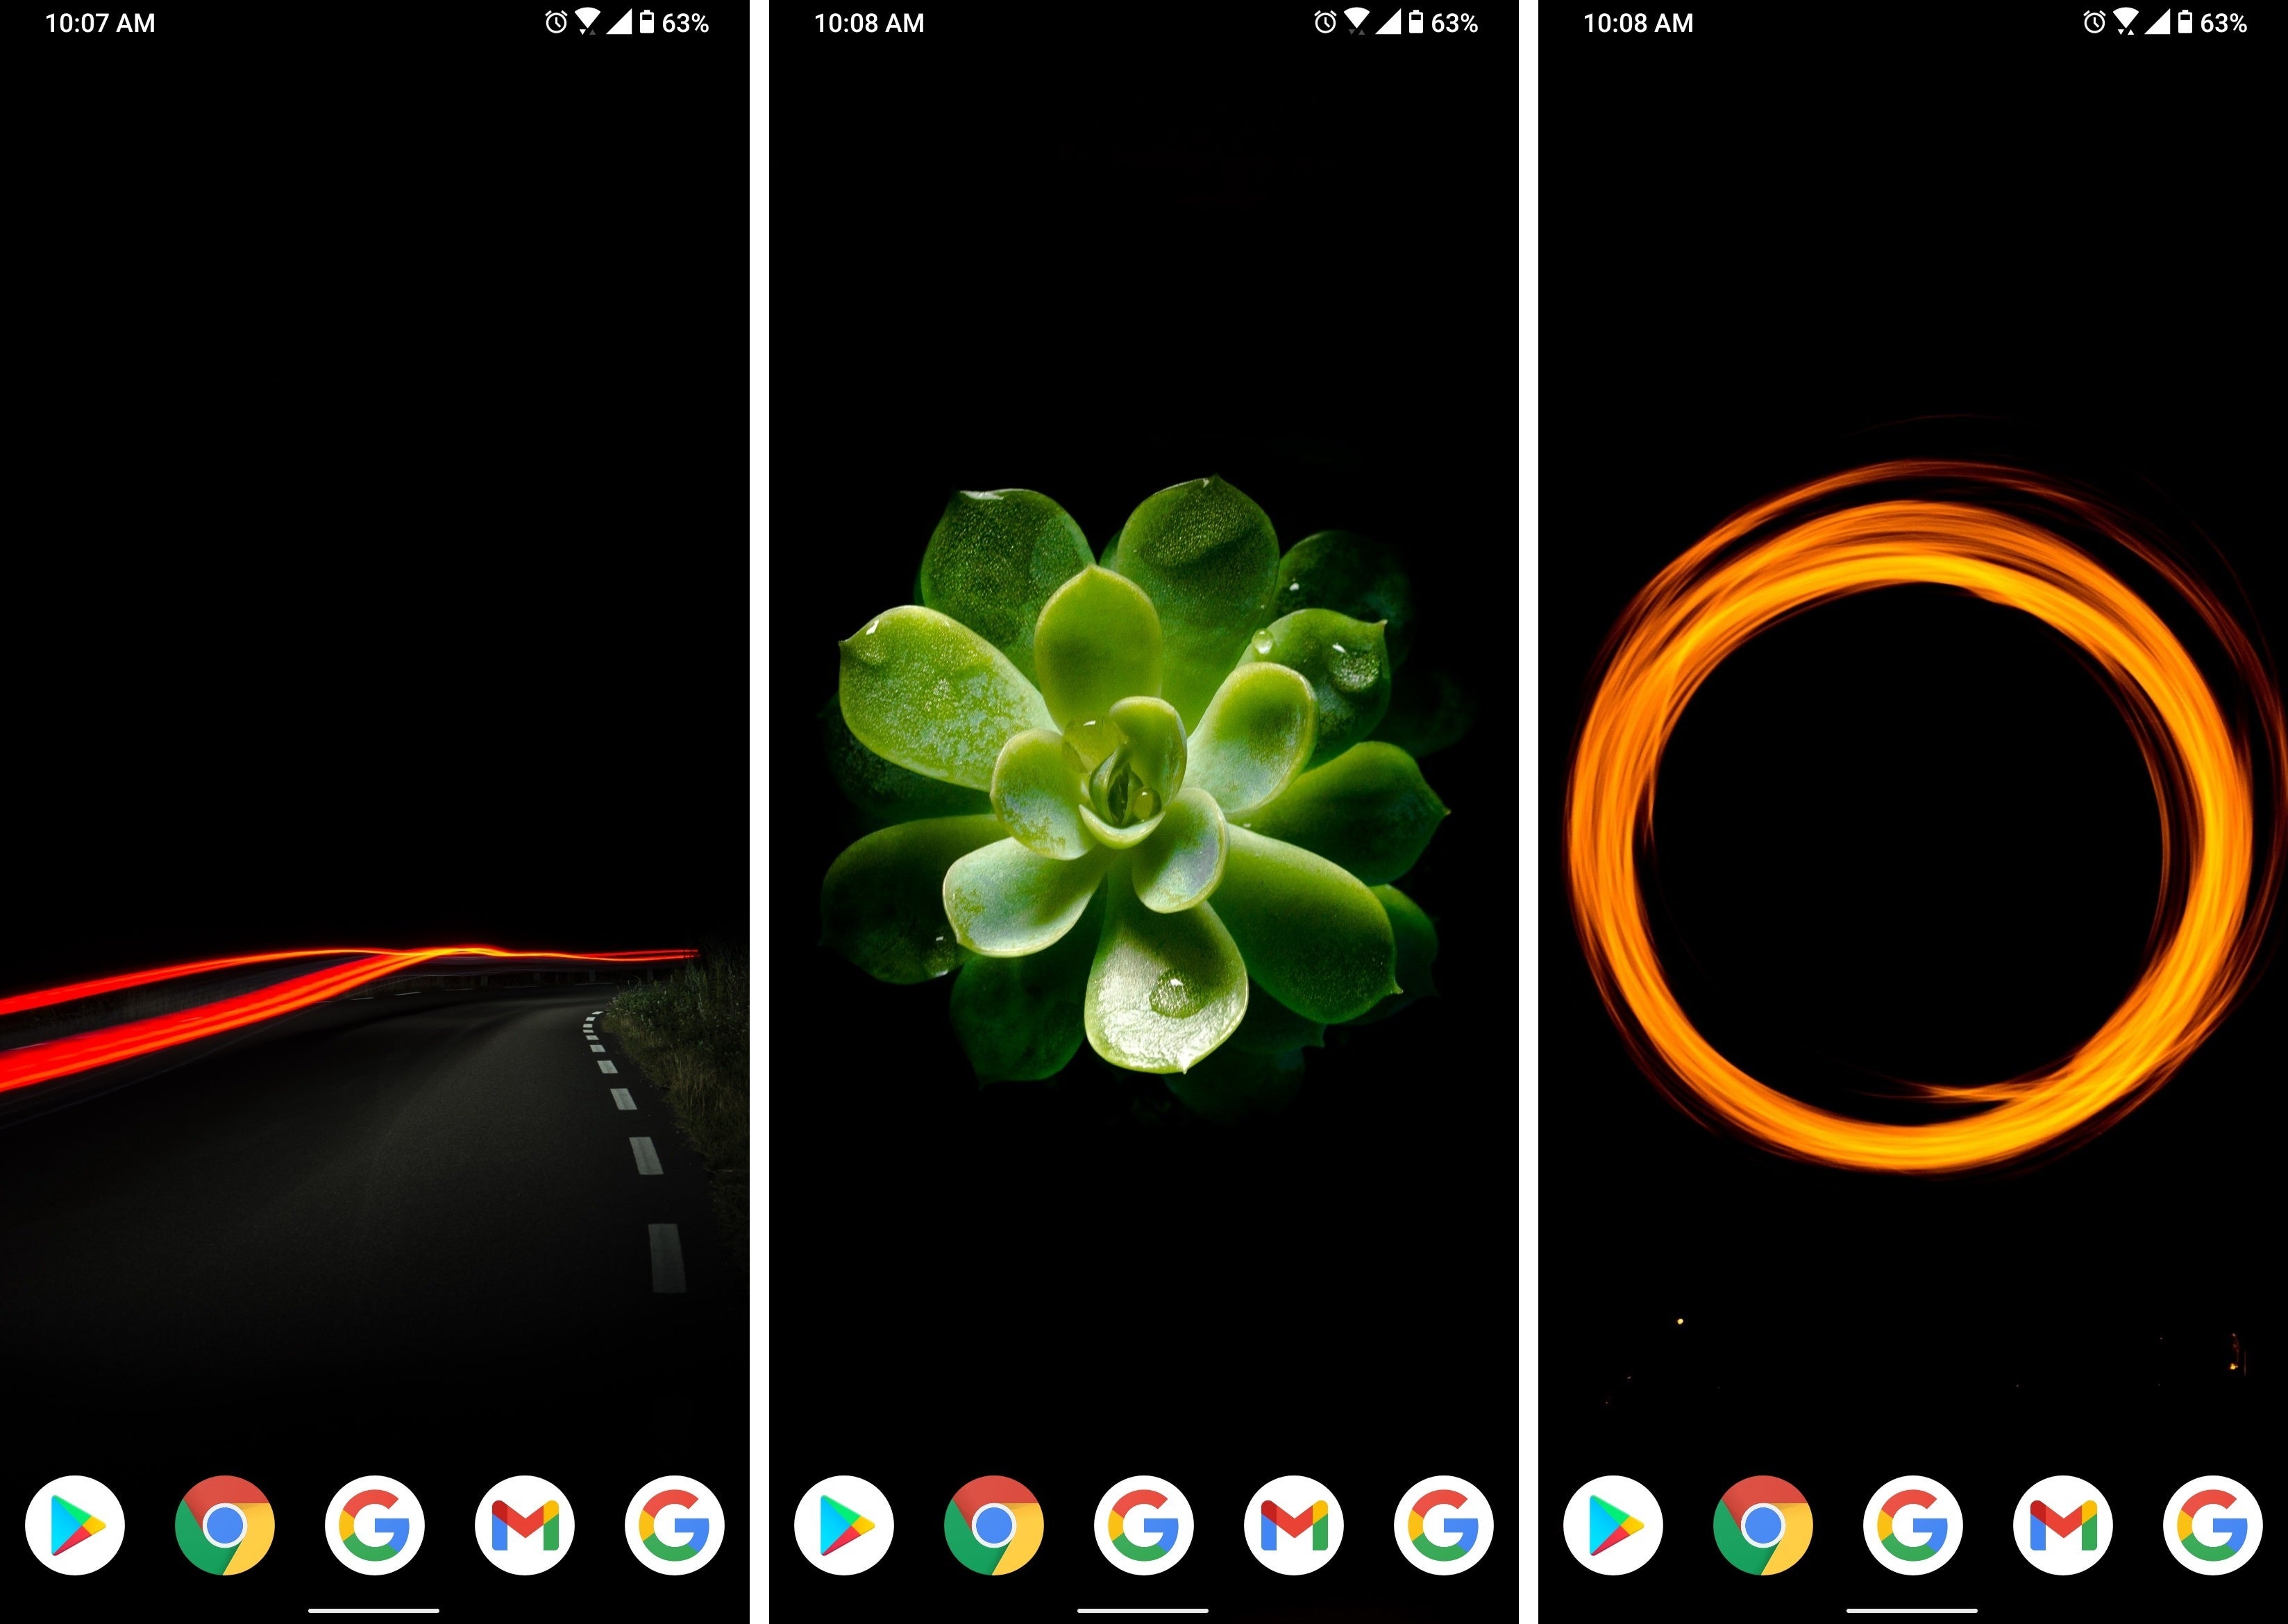 These three wallpapers are linked below - Android Refresh Tuesdays – AMOLED theme